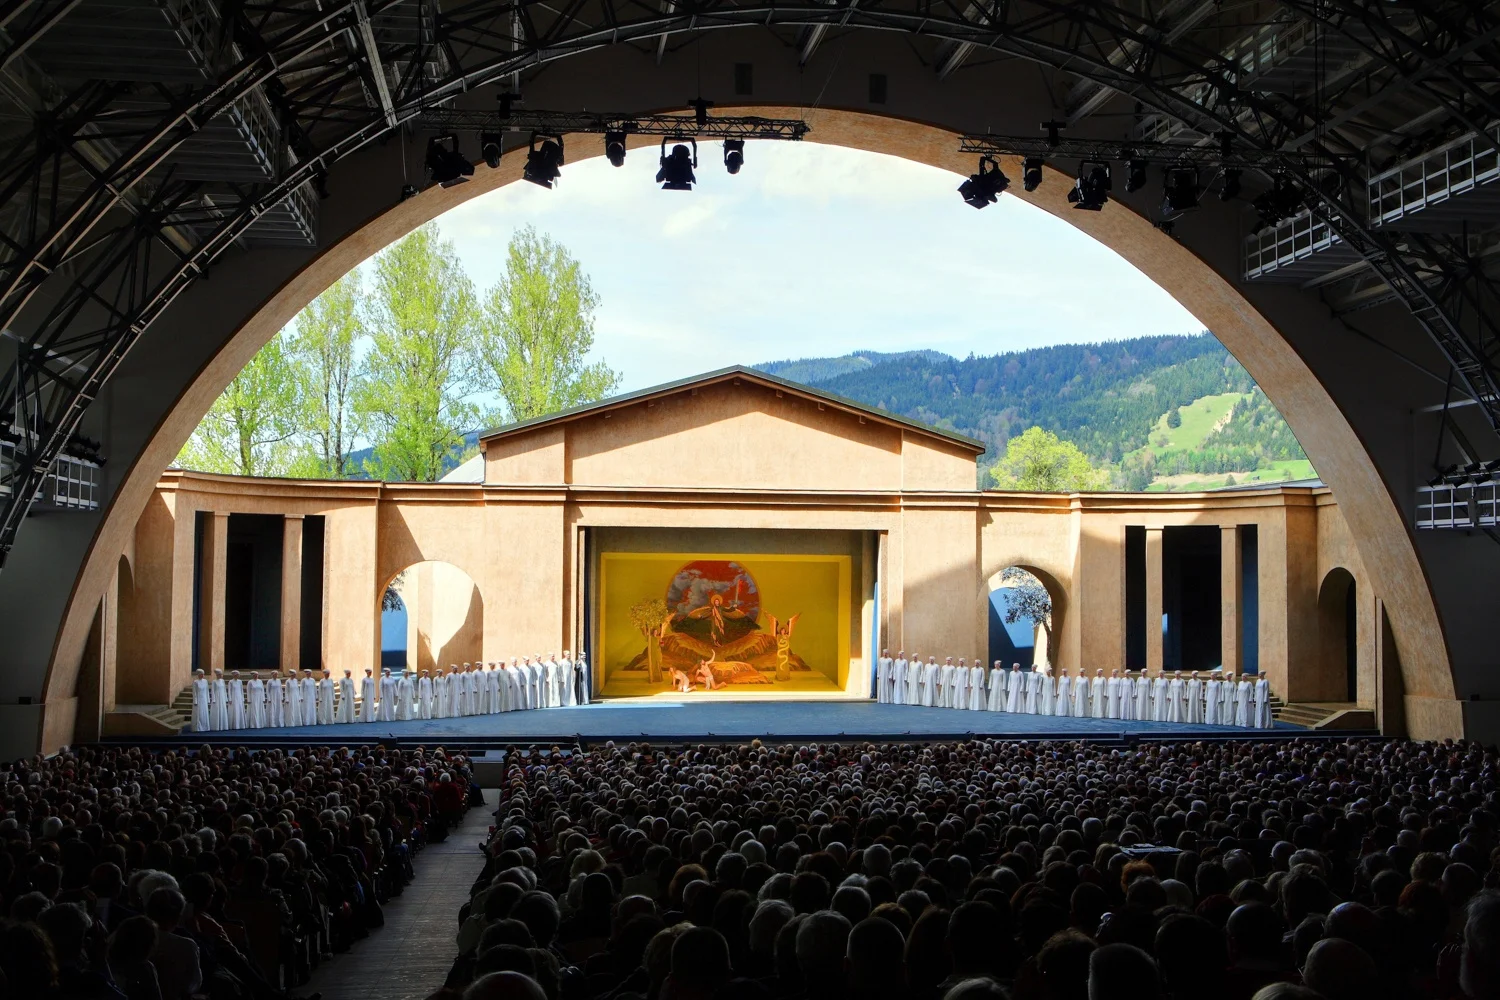 Passion Play theatre daytime Photos: Oberammergau Passion Play 2020